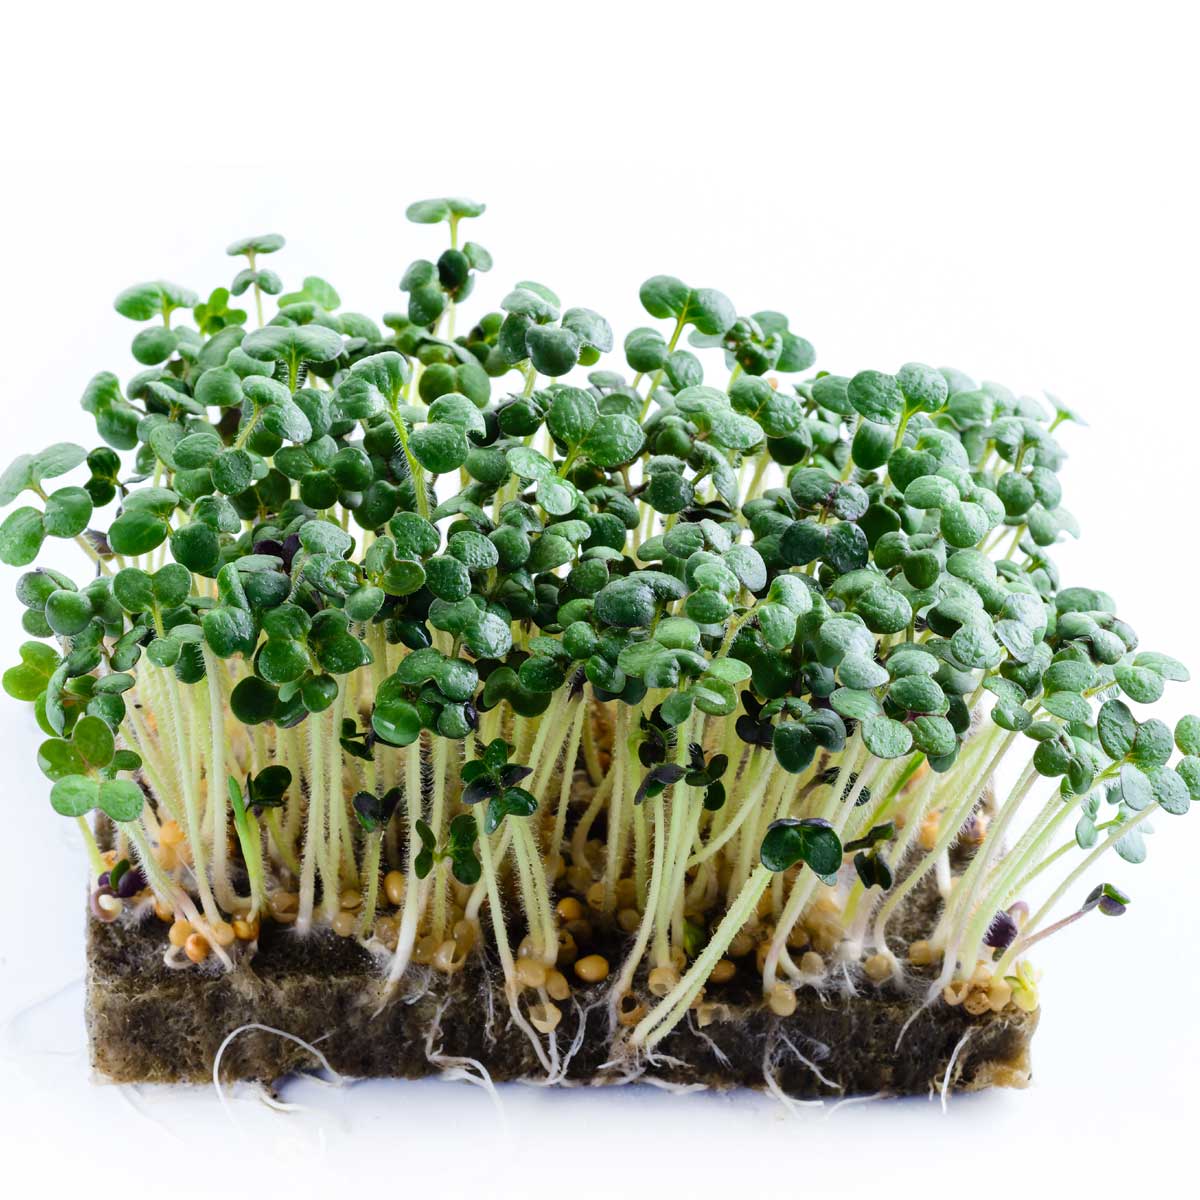 What is microgreen